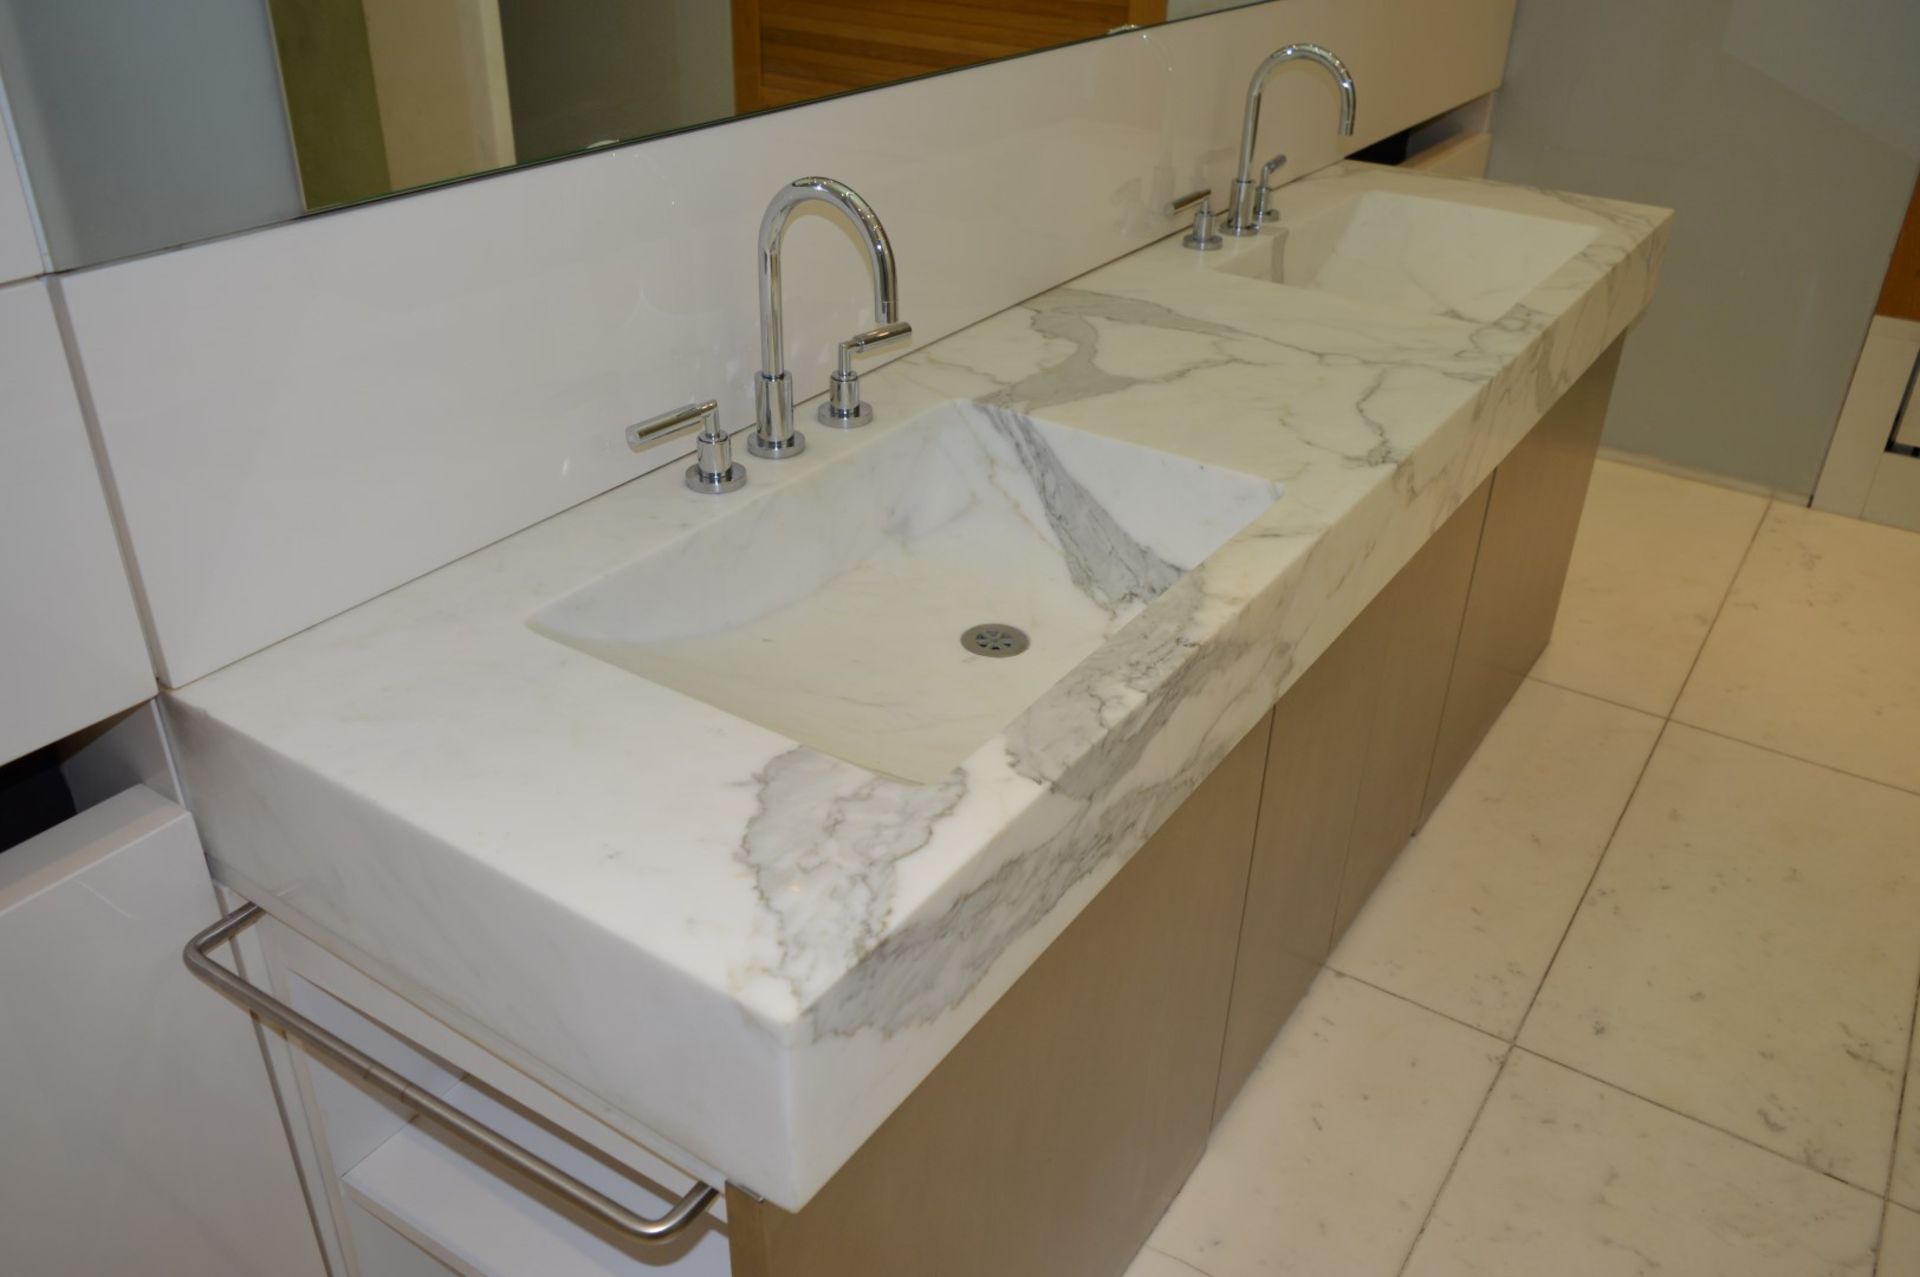 1 x Bespoke His & Hers Marble Bathroom Vanity Unit - Exquisite 7ft Twin Marble Sink Basin With Two - Image 13 of 25